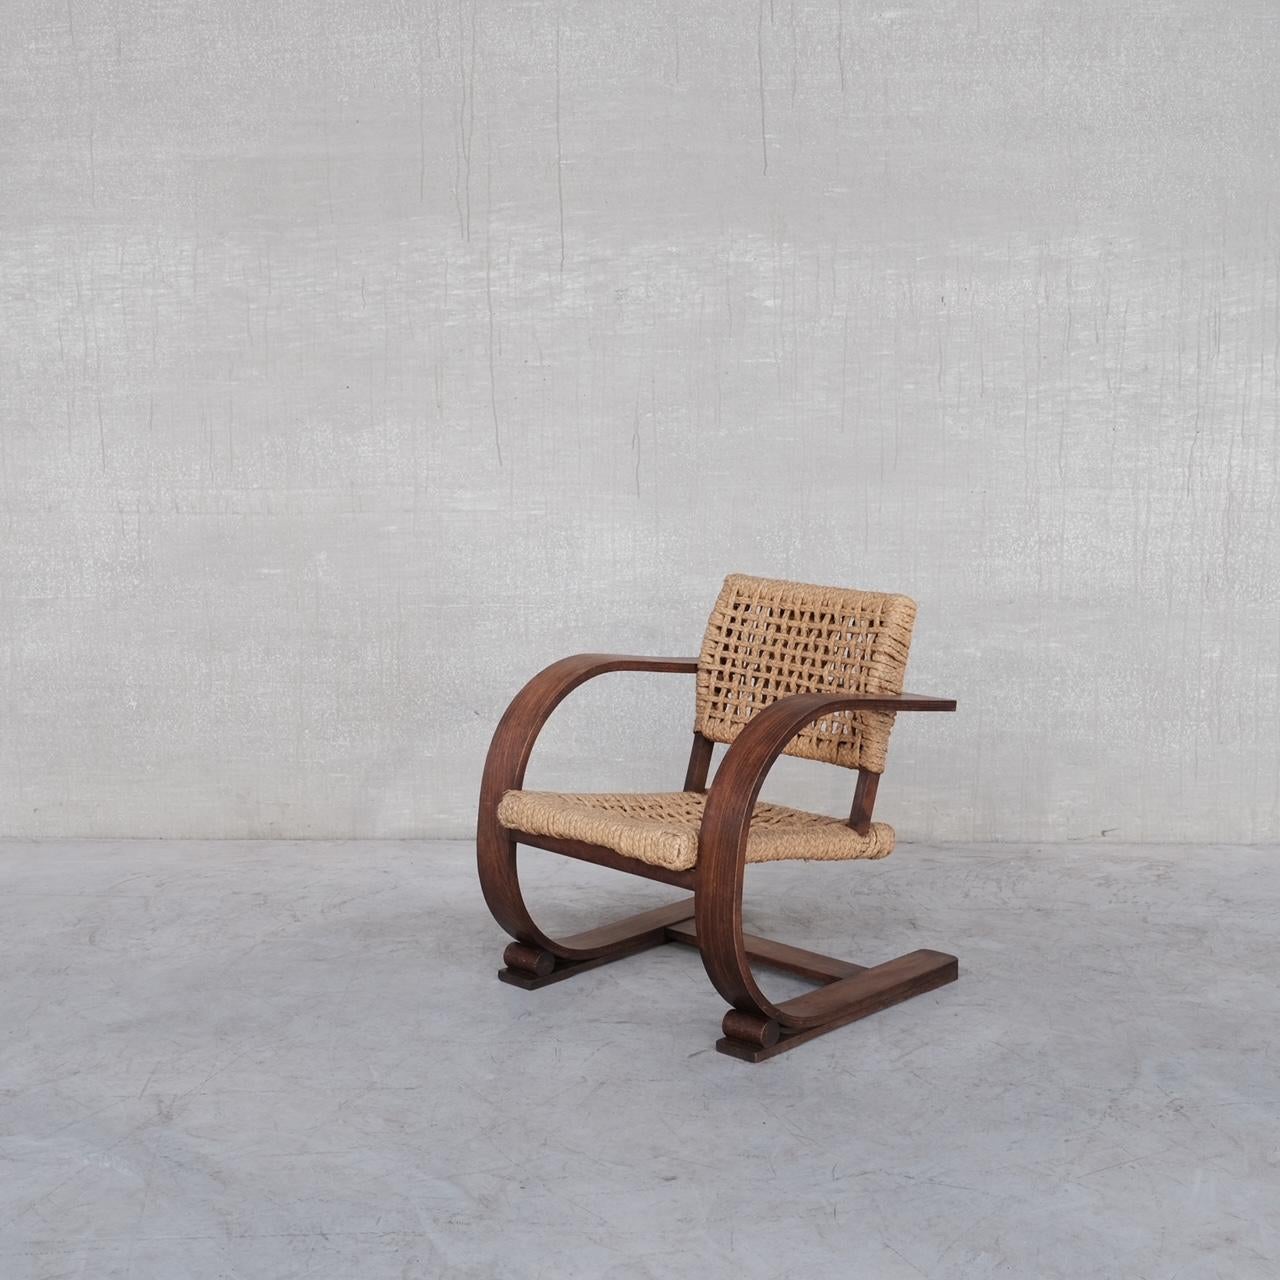 A bentwood and rope armchair by French design legends Audoux-Minet. 

France, c1960s. 

A scarce model increasingly hard to find and very sought after. 

The rope work remains in good condition.

Location: London Gallery. 

Dimensions: 86